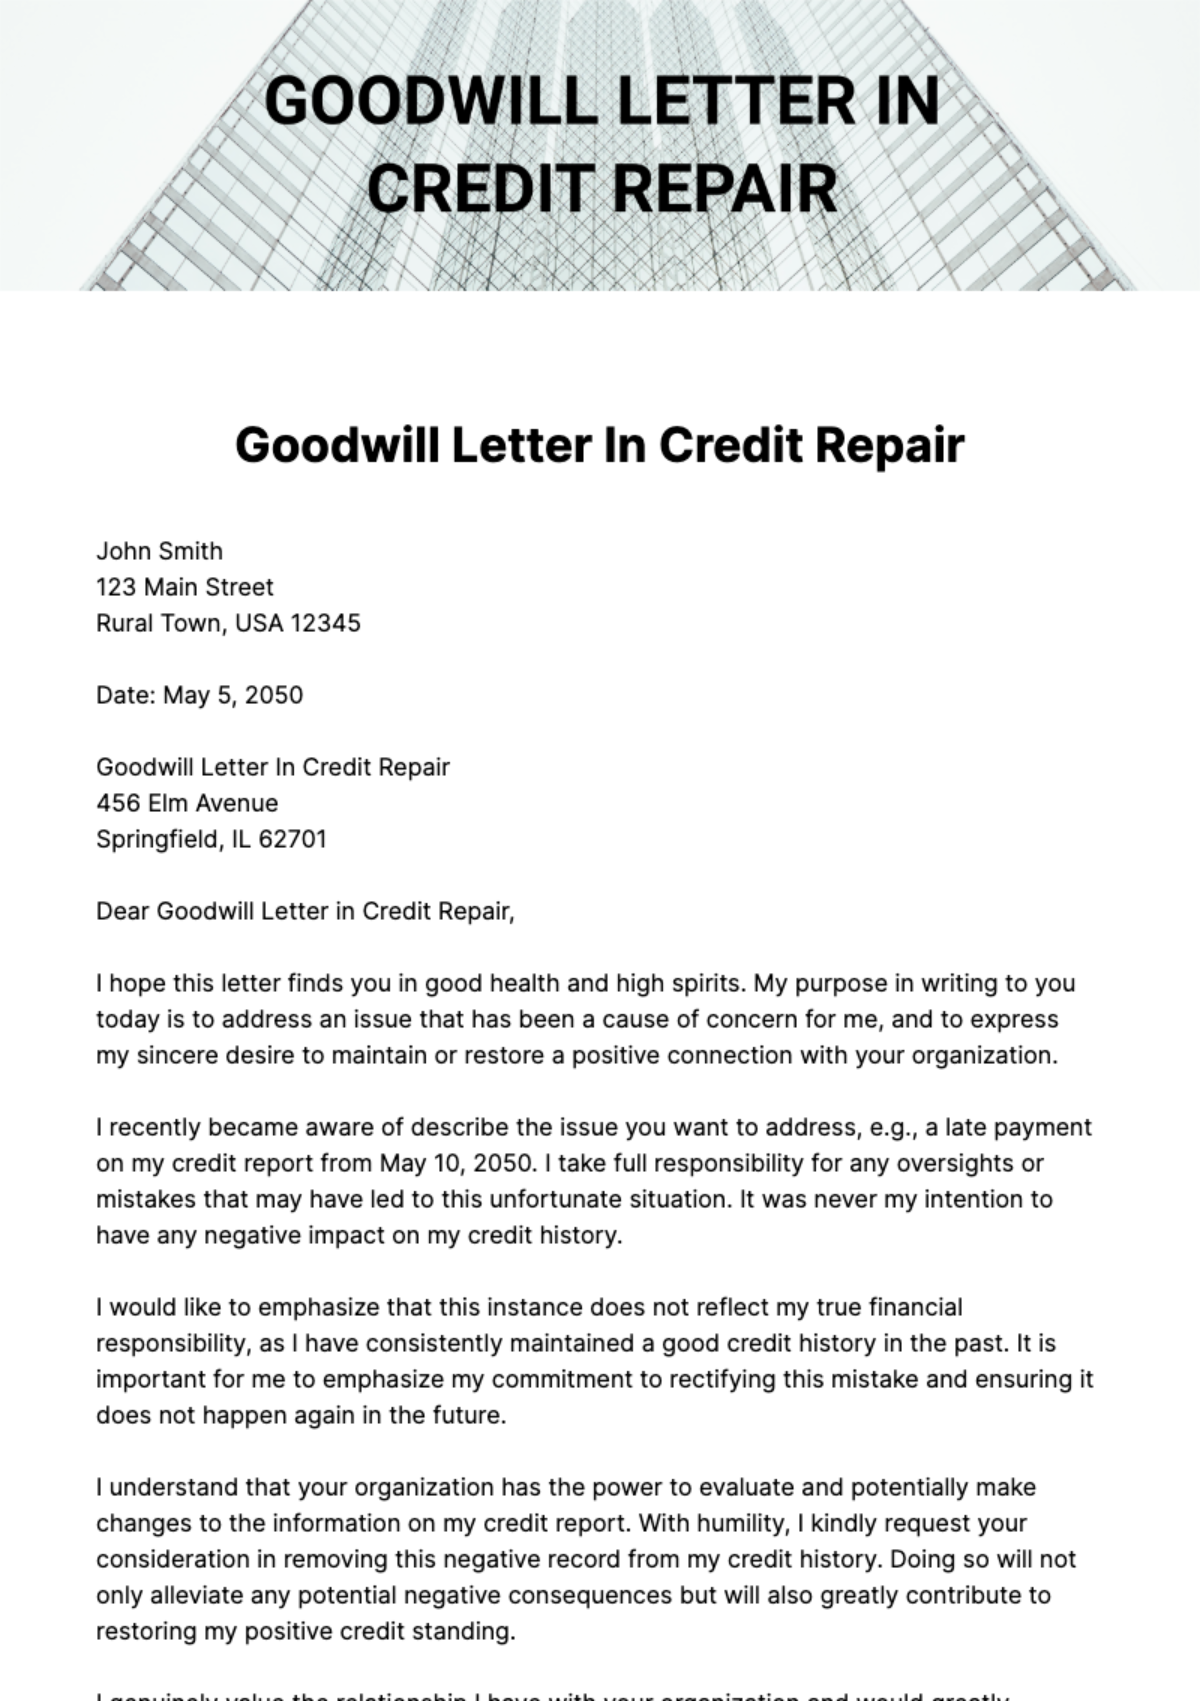 Free Goodwill Letter In Credit Repair Template